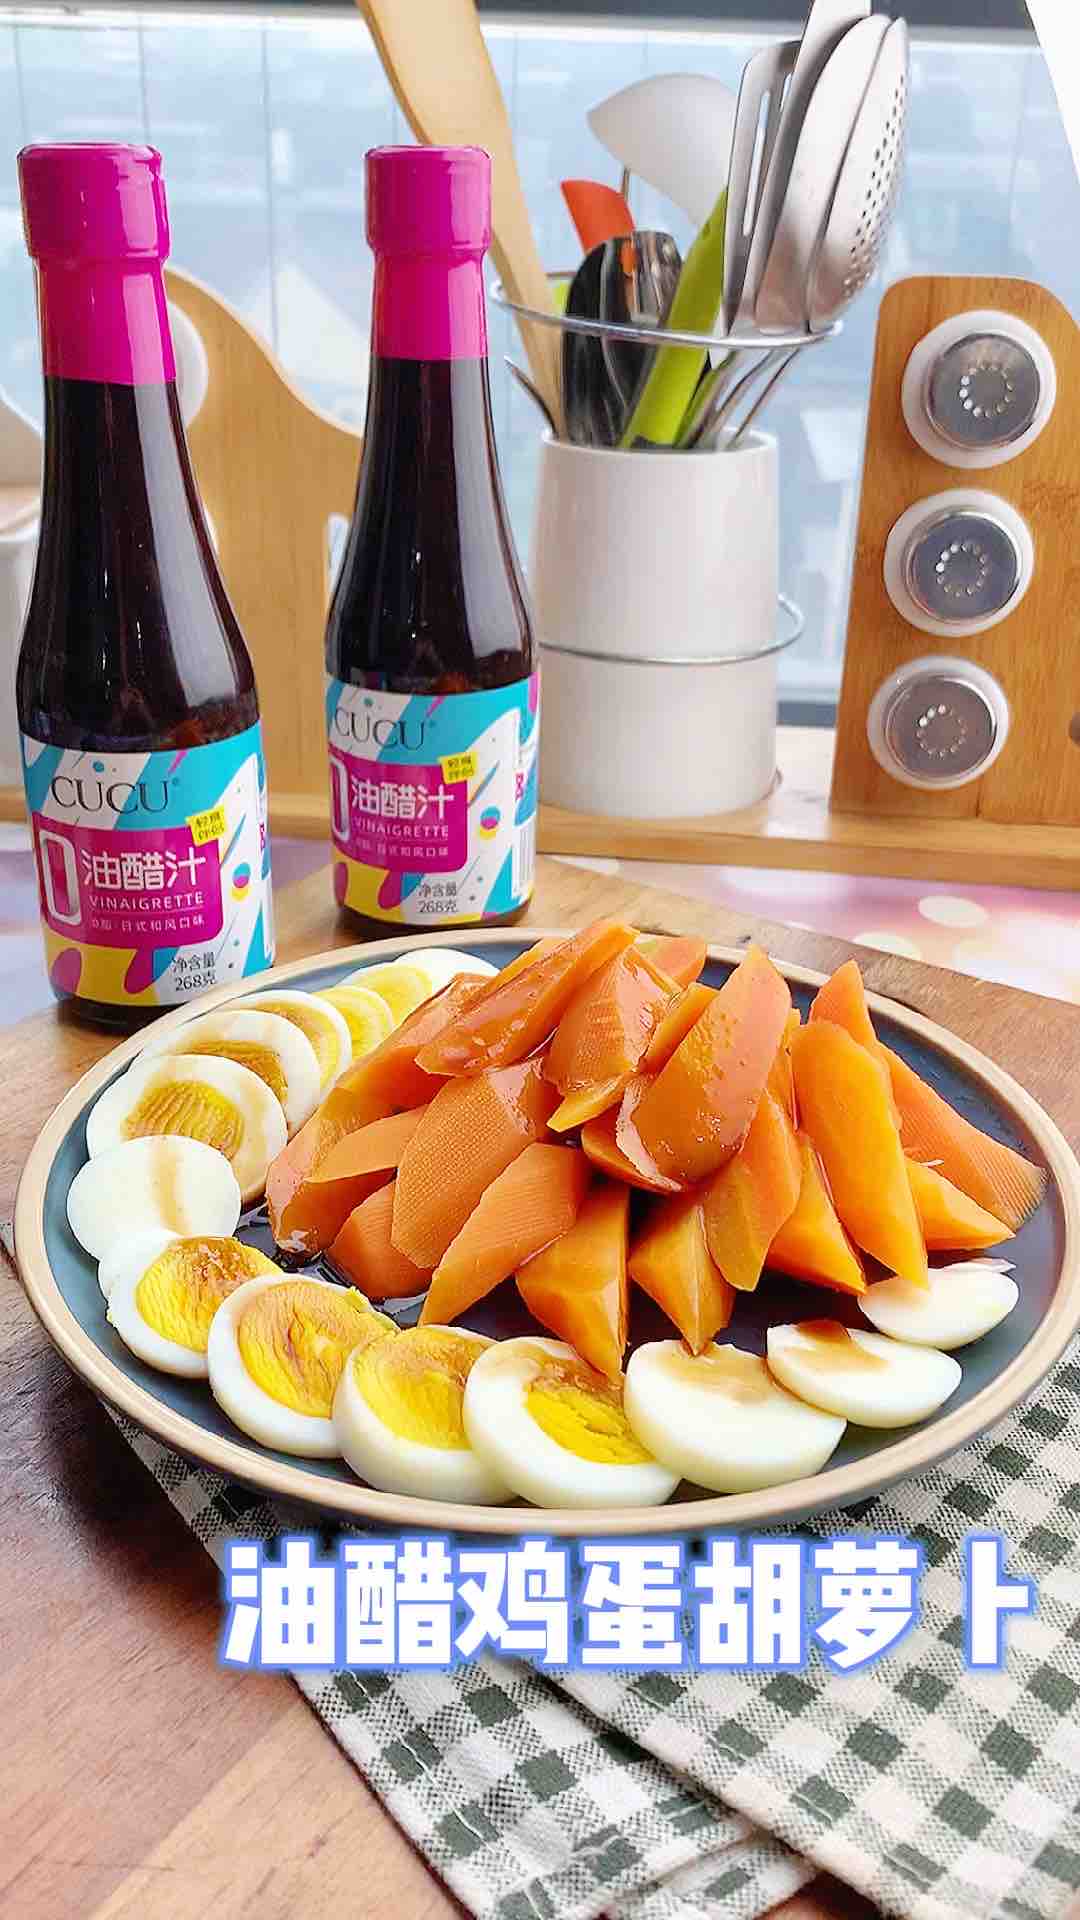 Eggs and Carrots in Oil and Vinegar